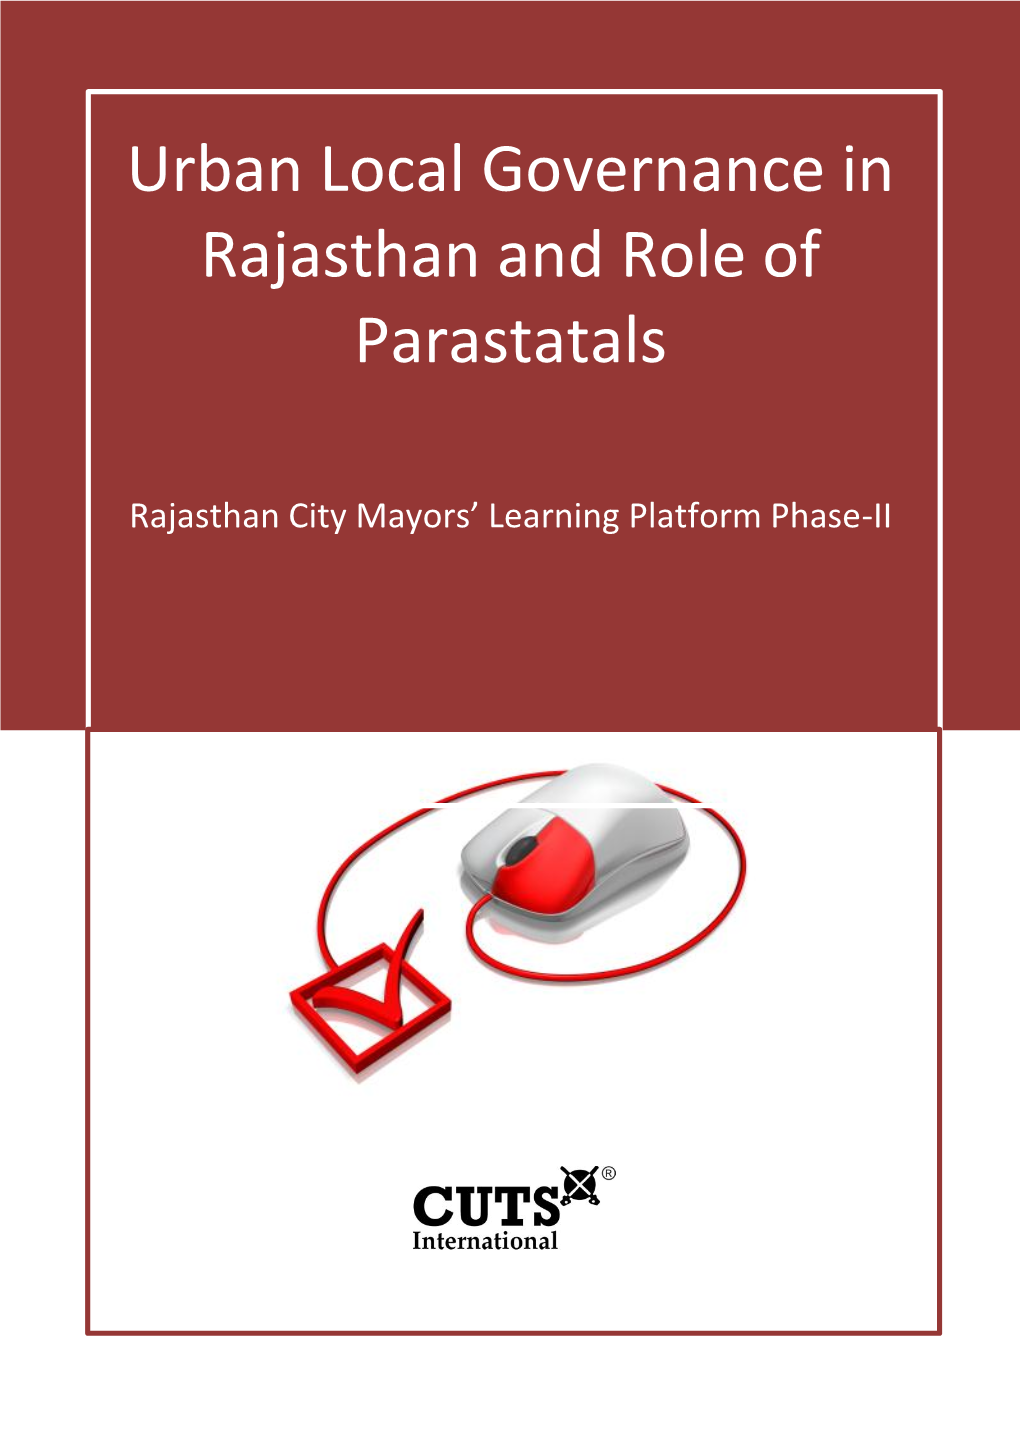 Urban Local Governance in Rajasthan and Role of Parastatals